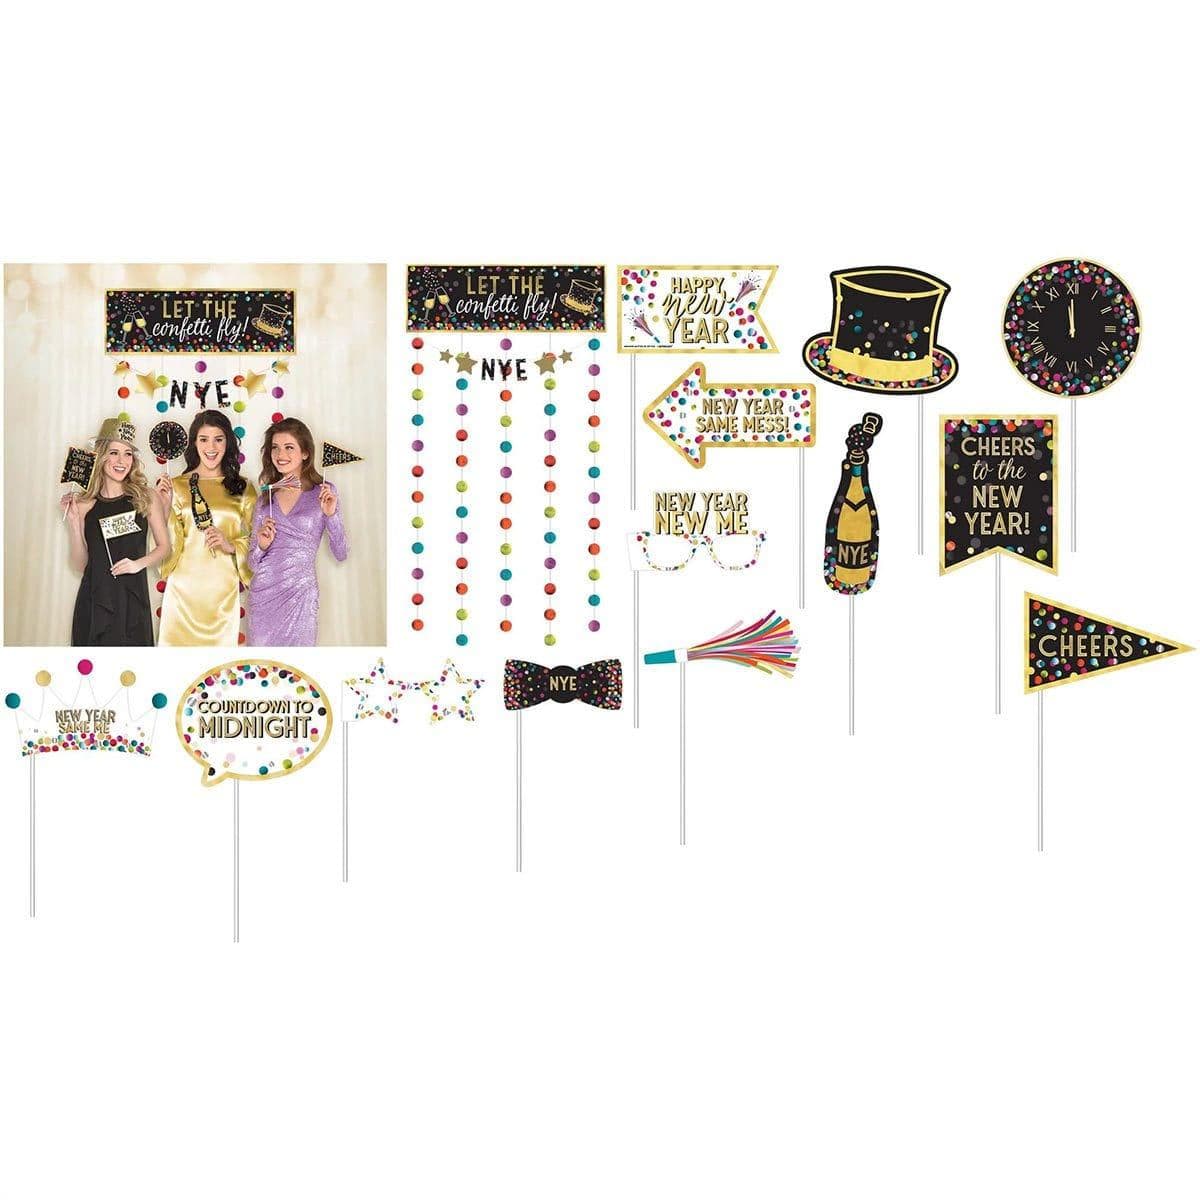 Buy New Year Photo Booth Kit - Colorful Confetti sold at Party Expert